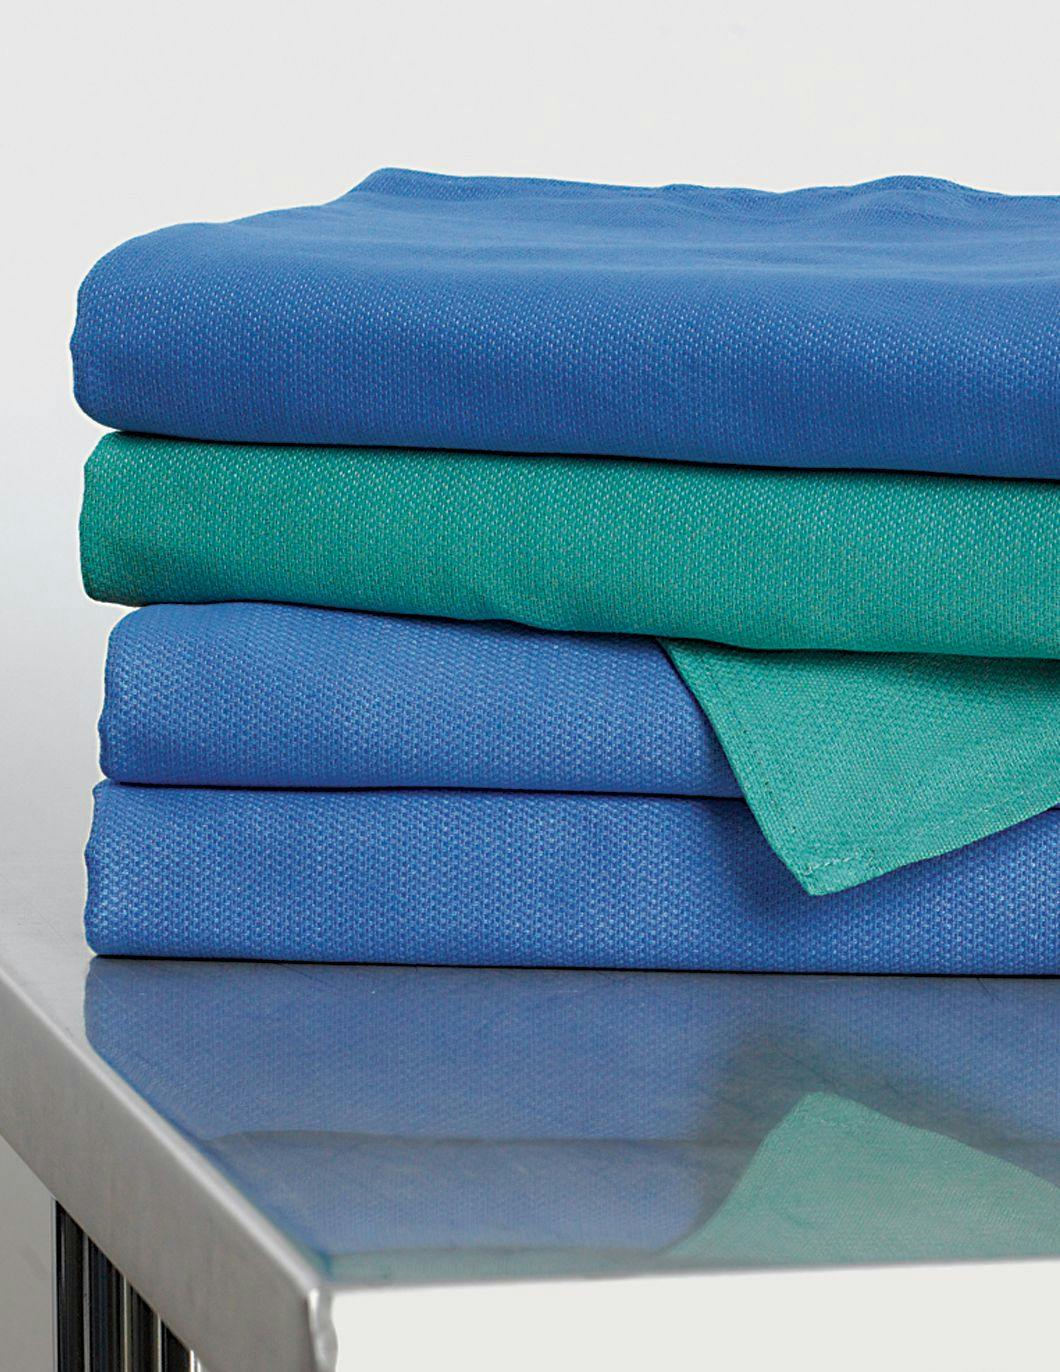 veterinary-absorbent-cotton-towels